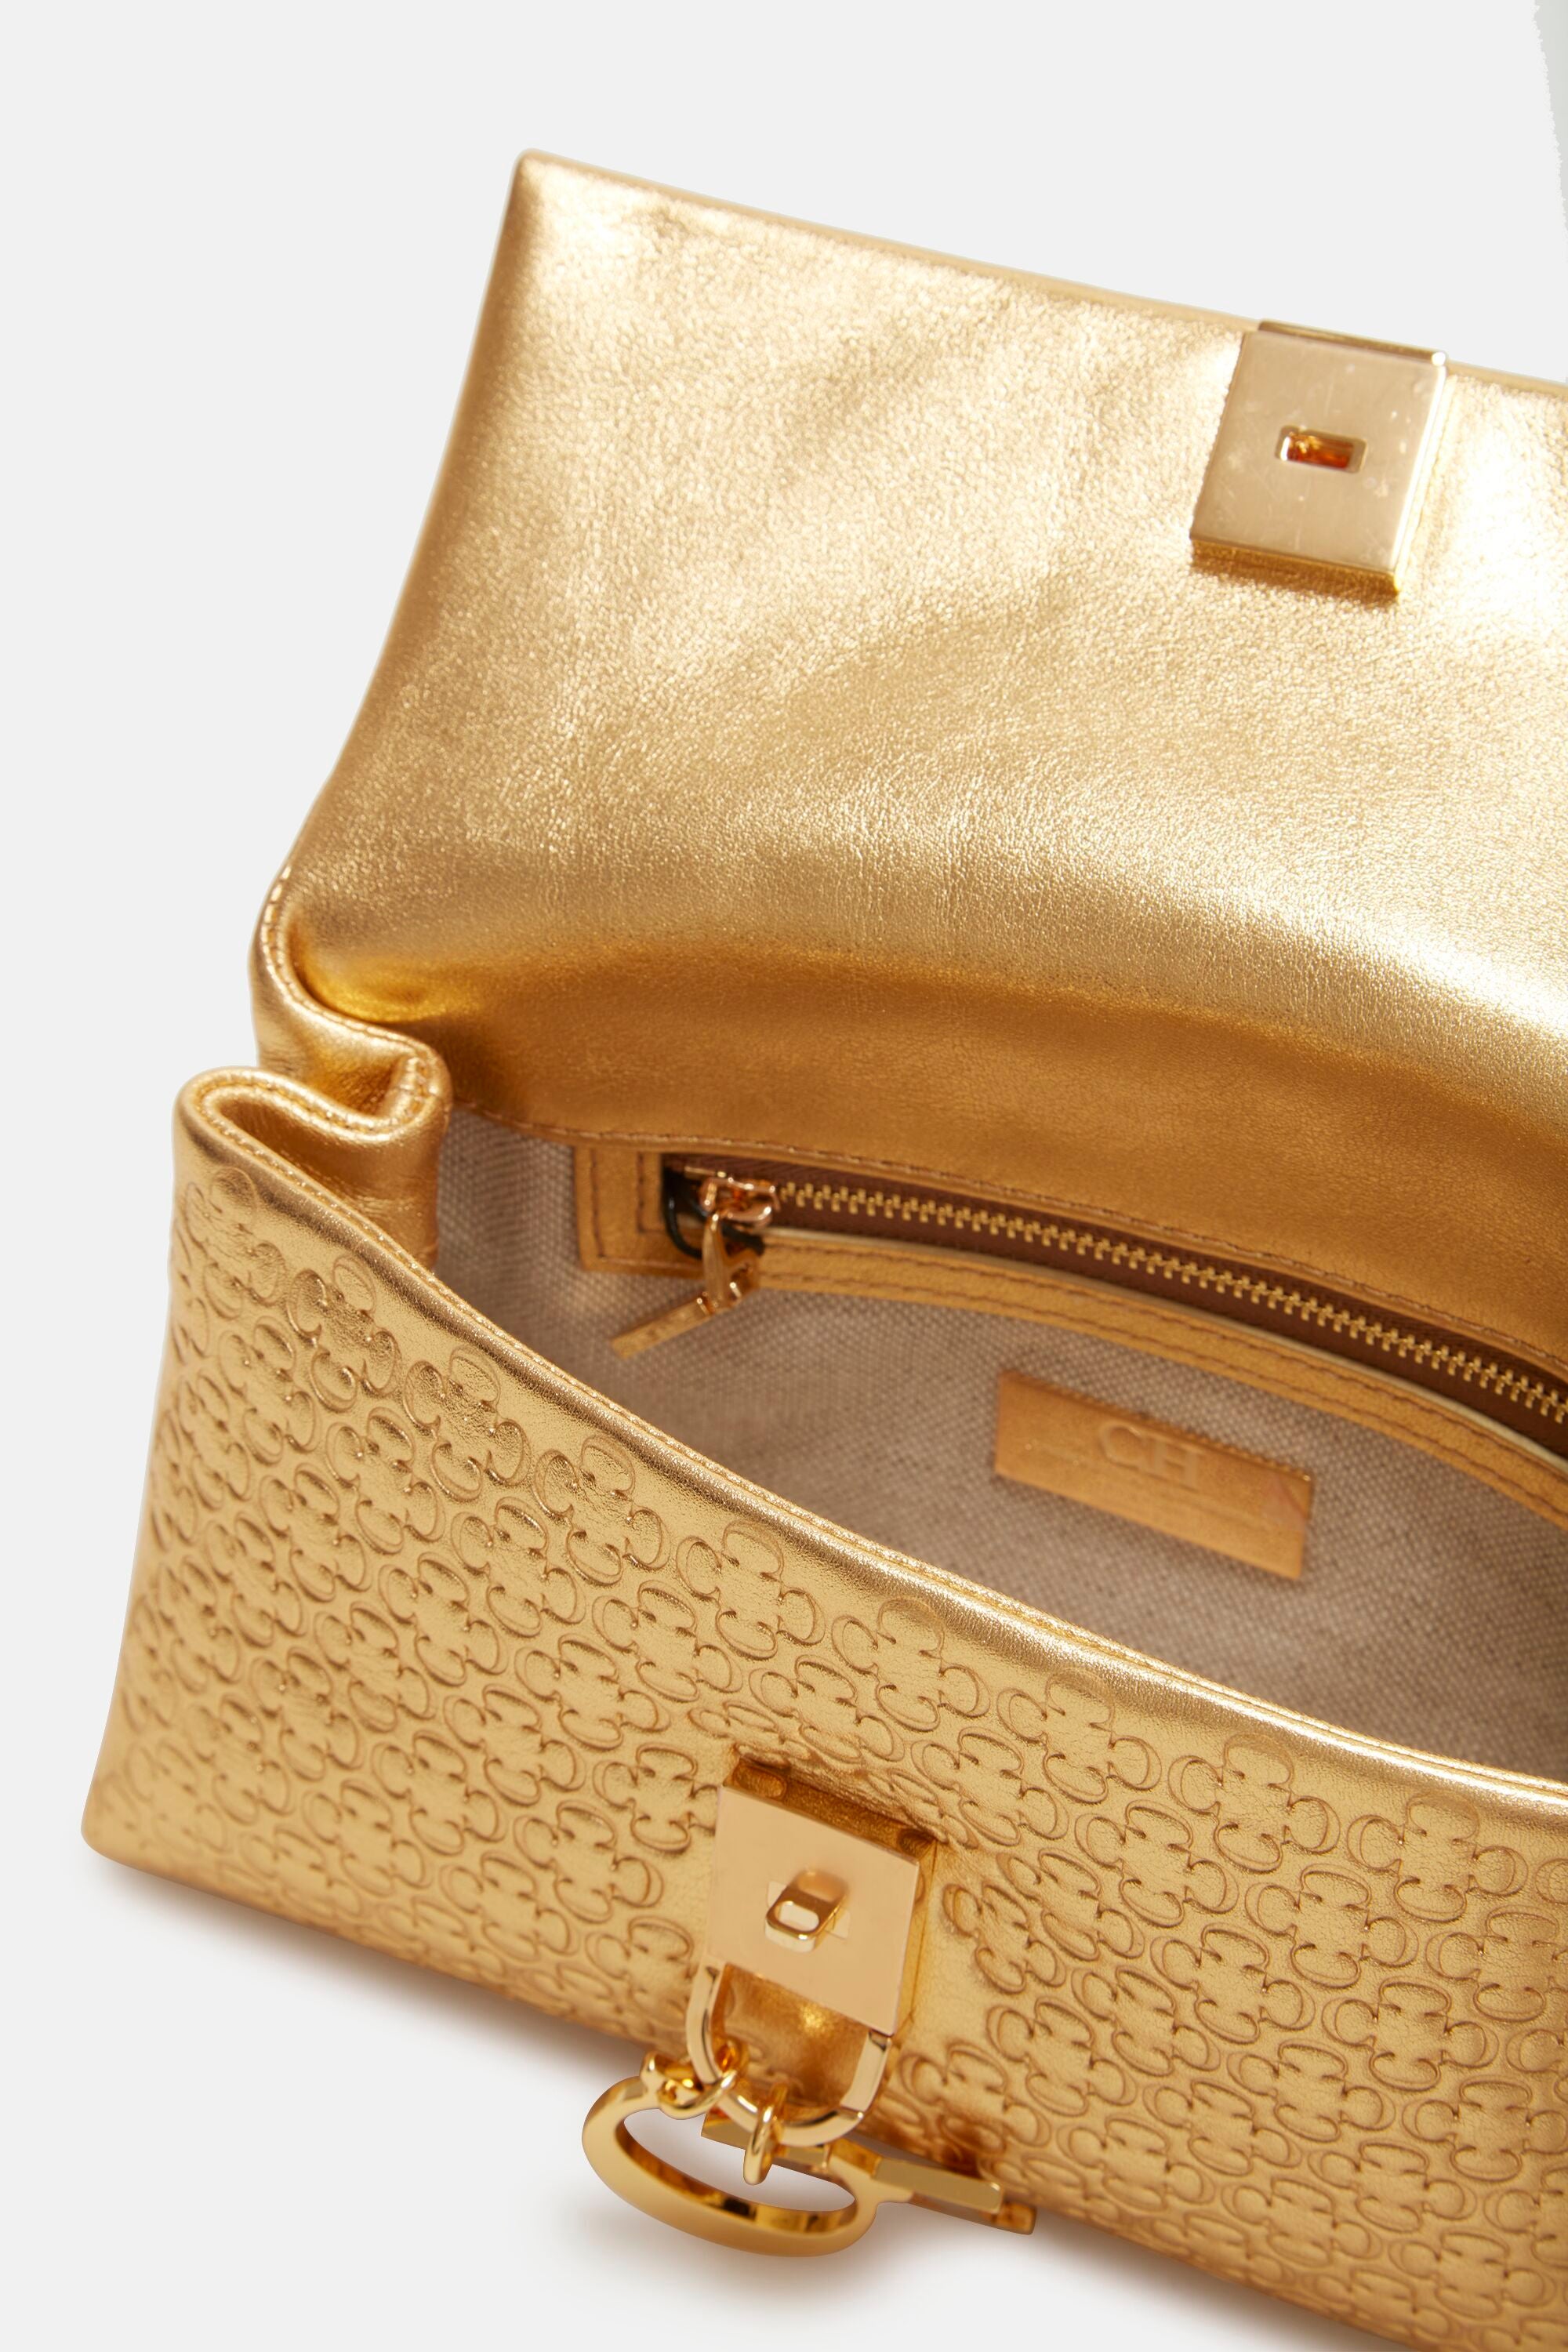 Small Leather Bag in GOLD. Cross Body Bag Shoulder Bag in 